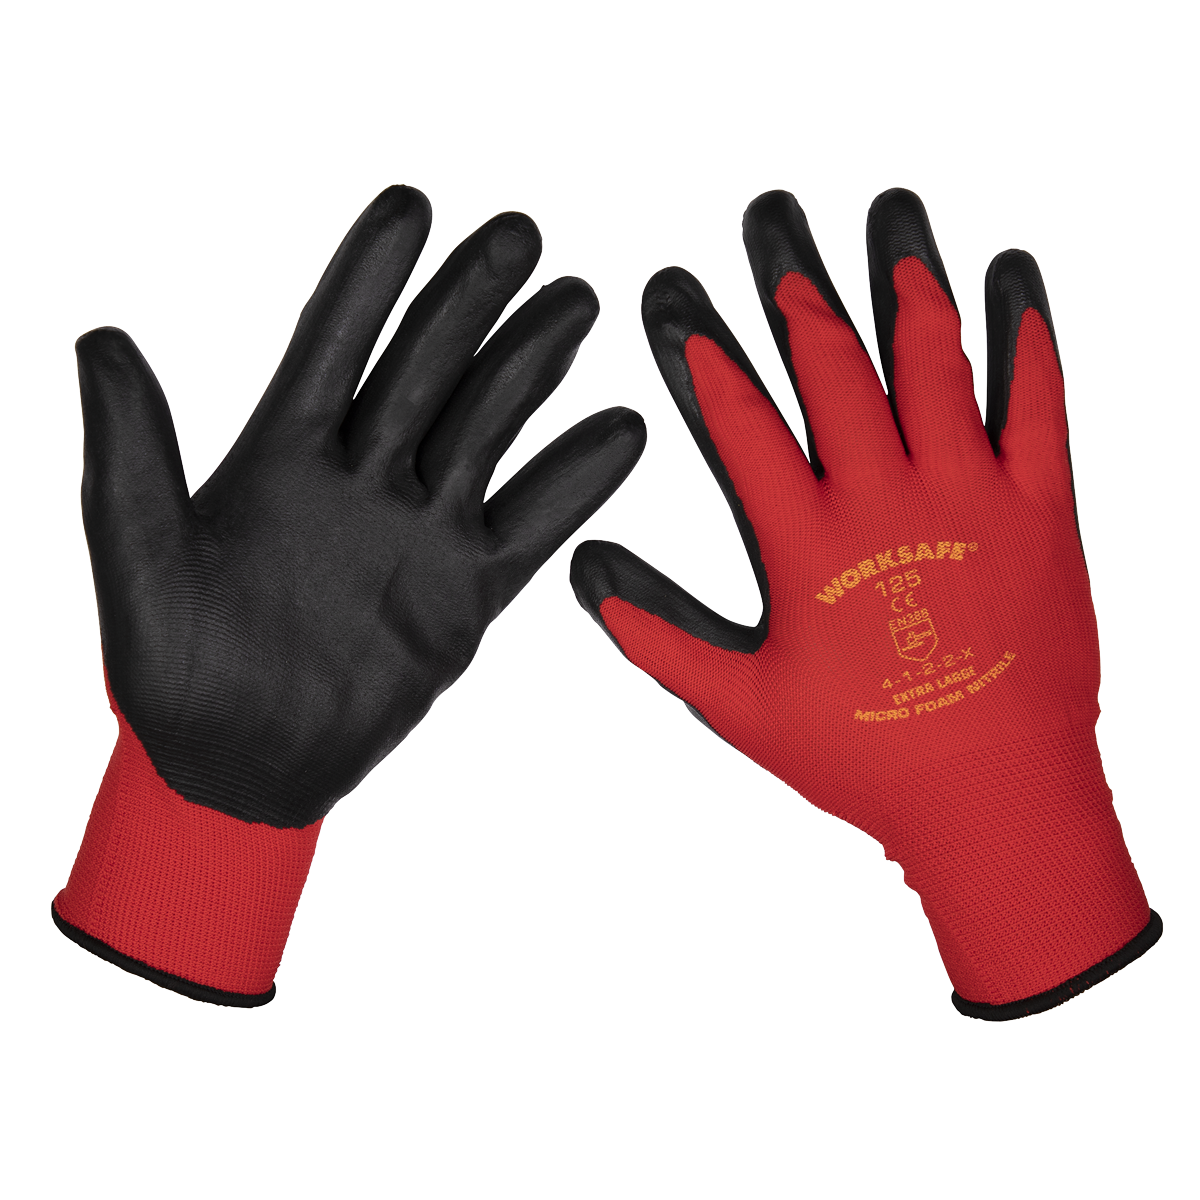 Flexi Grip Nitrile Palm Gloves (X-Large) - Pack of 6 Pairs